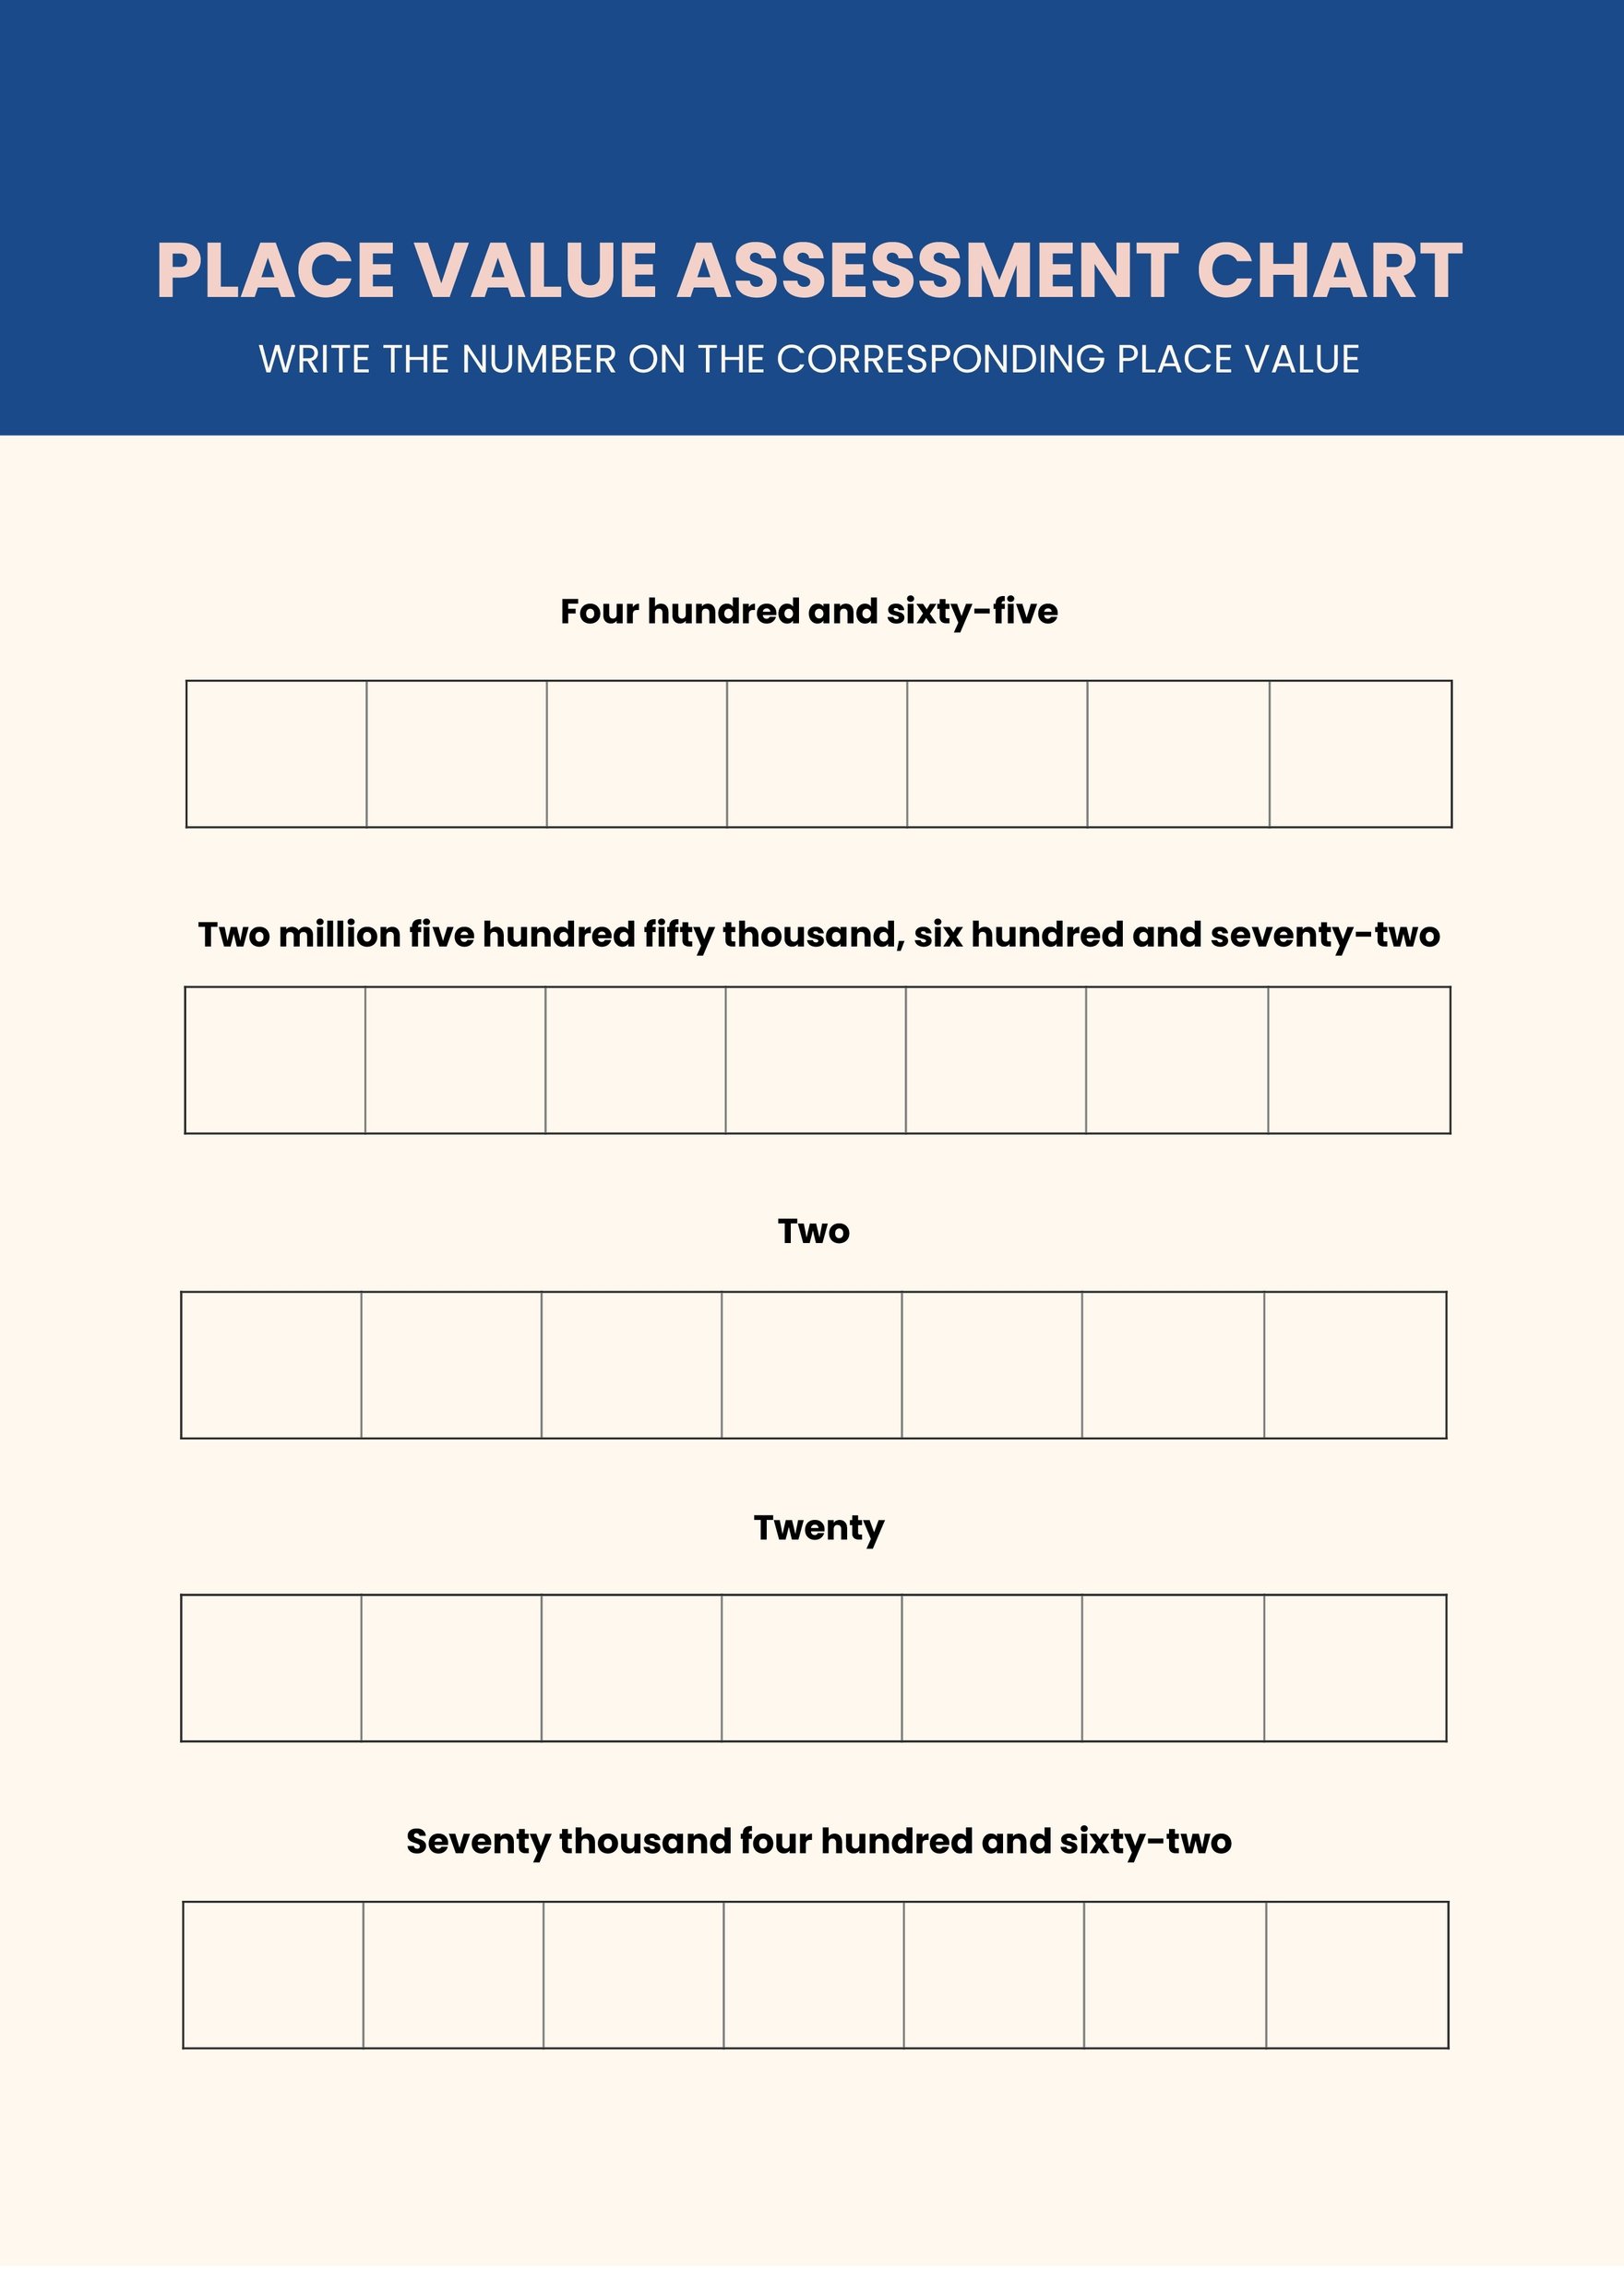 Free Place Value Assessment Chart in PDF, Illustrator